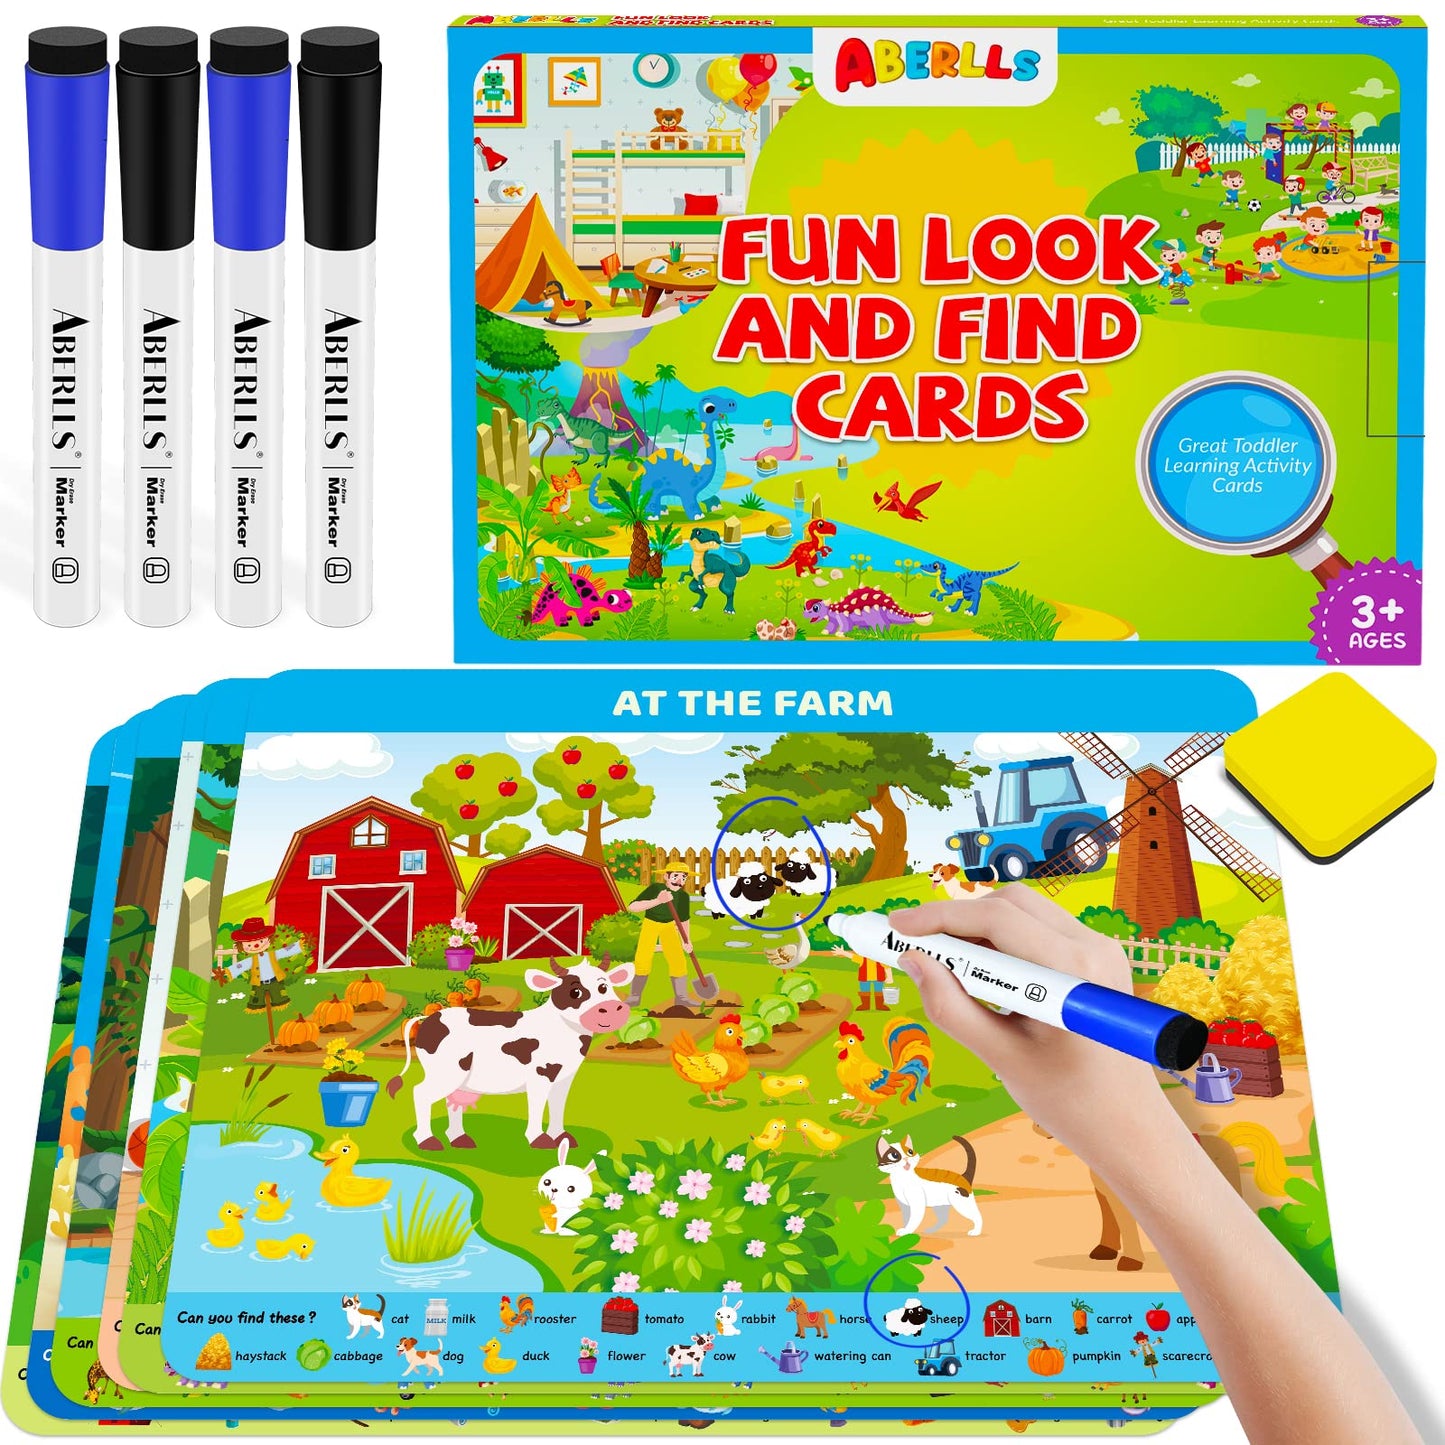 Search and Find Cards for Kids Ages 3 4 5 6 year olds, Toddler Preschool Learning Reusable Activity Mats with 4 Dry Erase Markers, Kindergarten Educational Game Toys for Boys & Girls Toddlers Ages 3-6